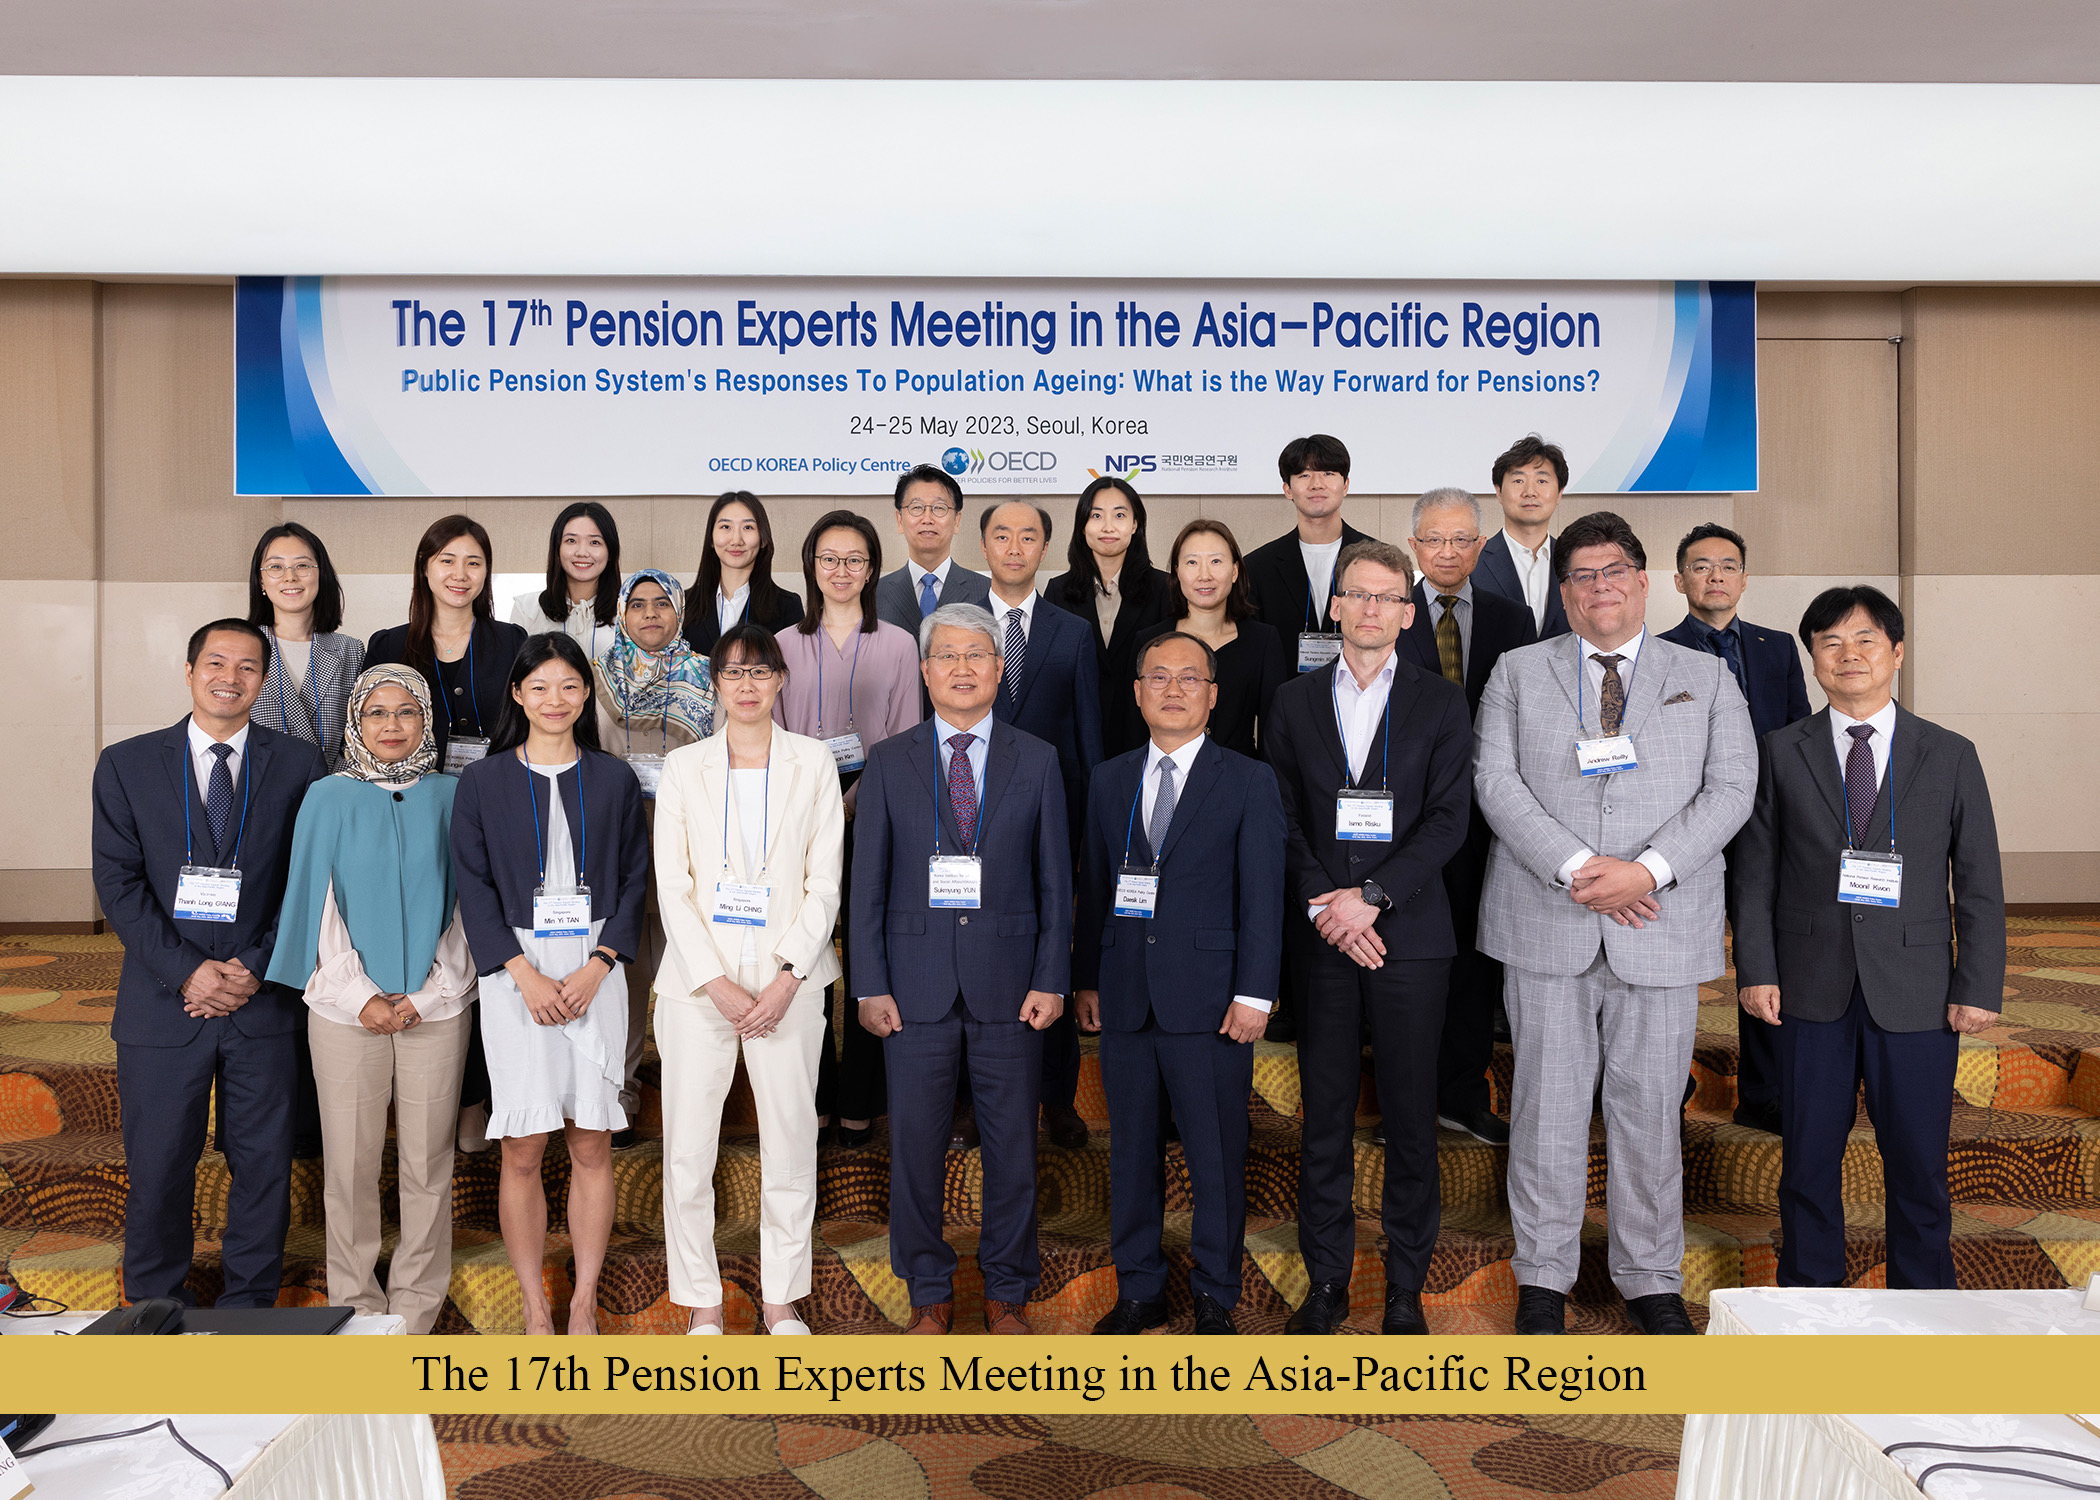 The 17th Pension Experts Meeting in the Asia-Pacific Region